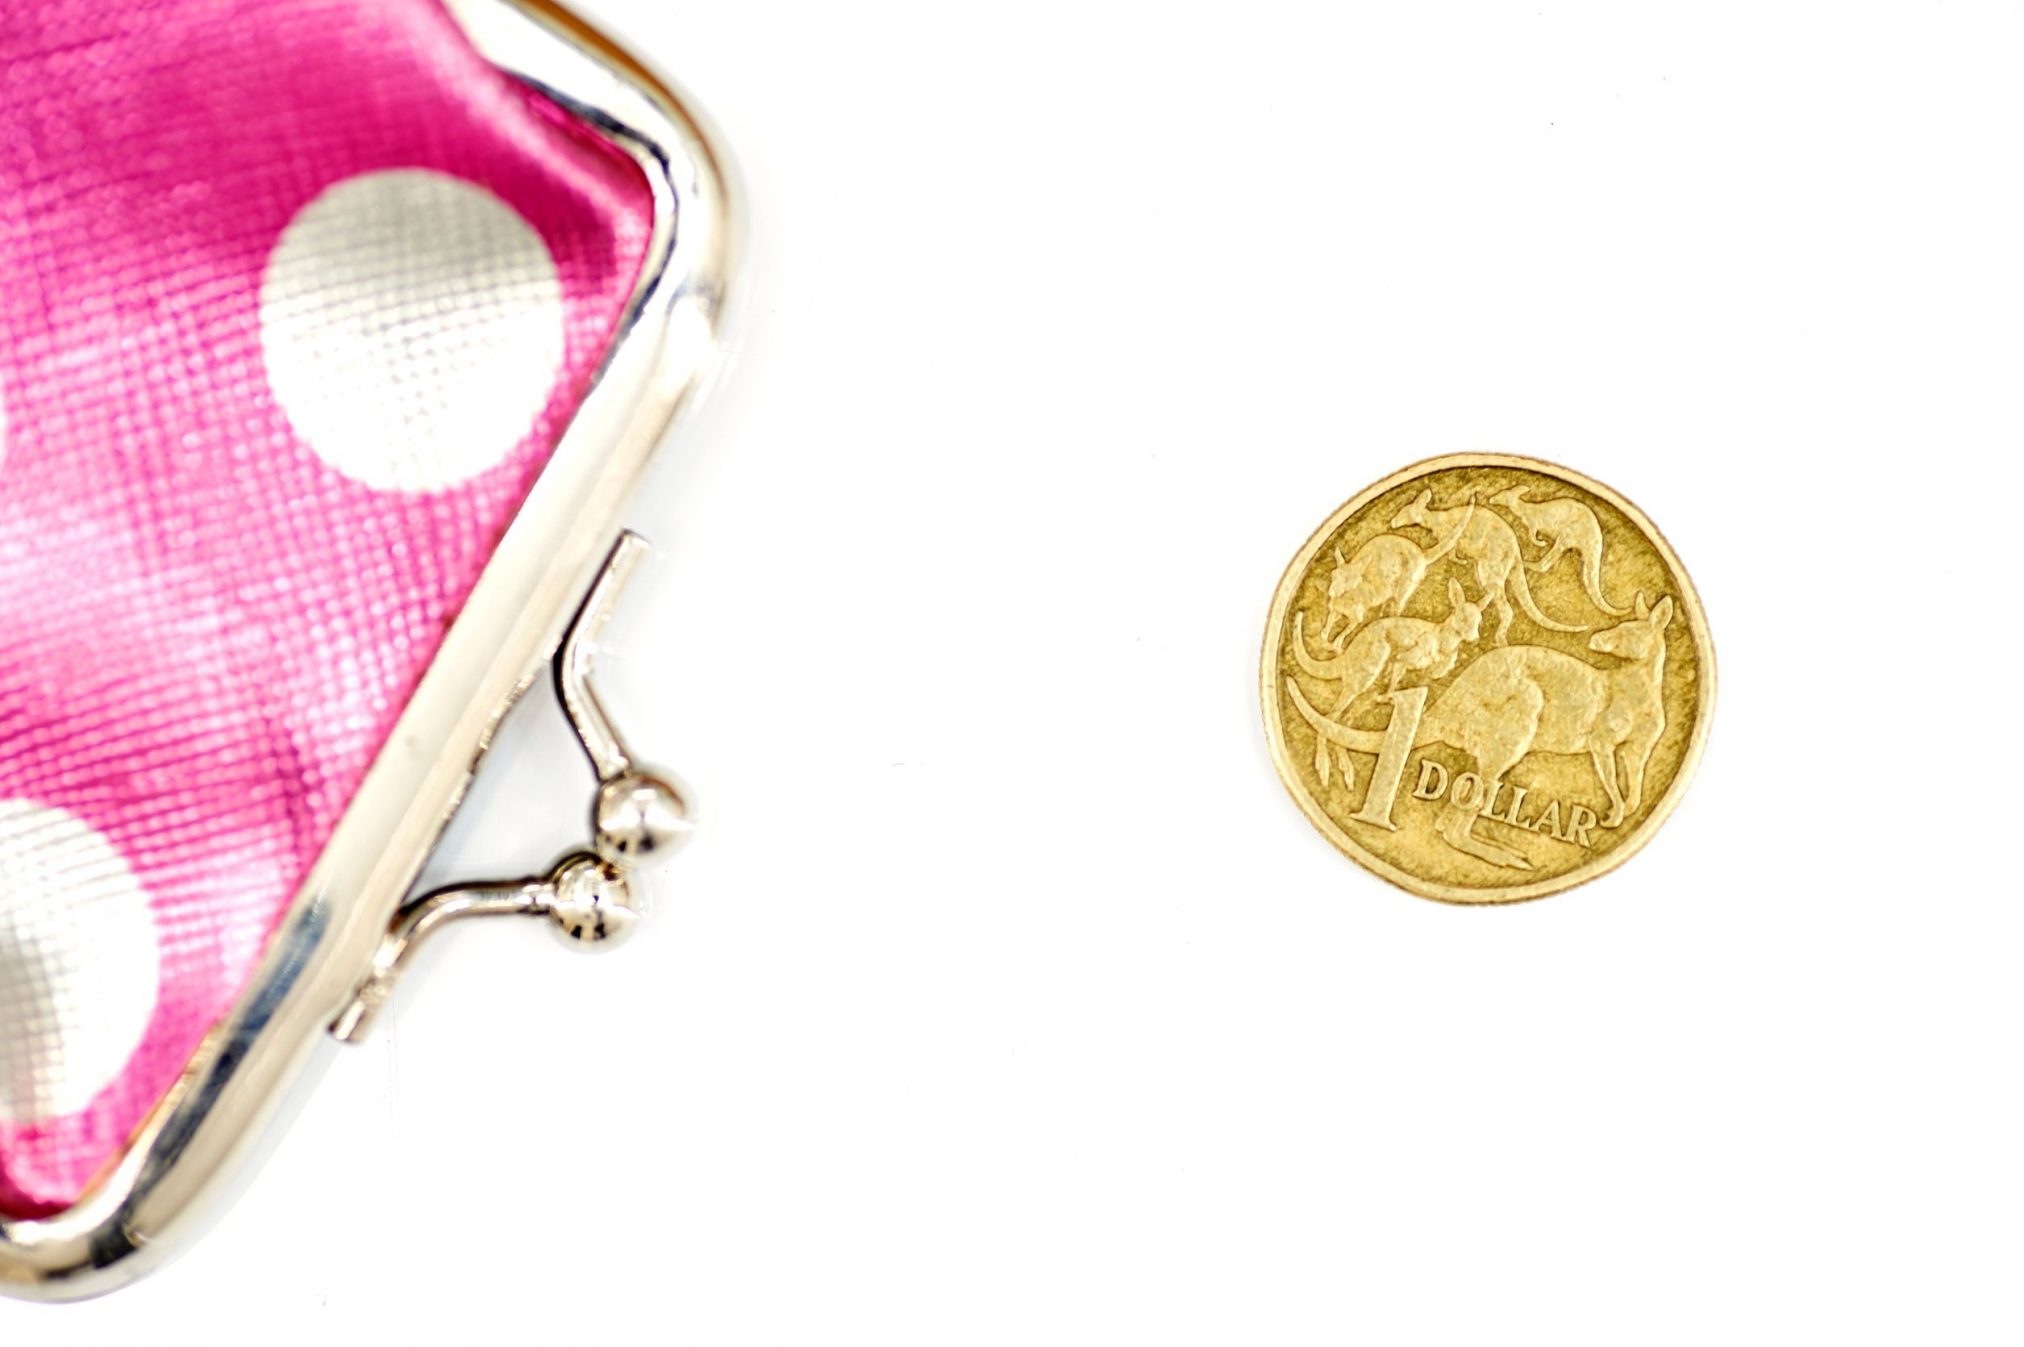 $1 coin and pink coin purse